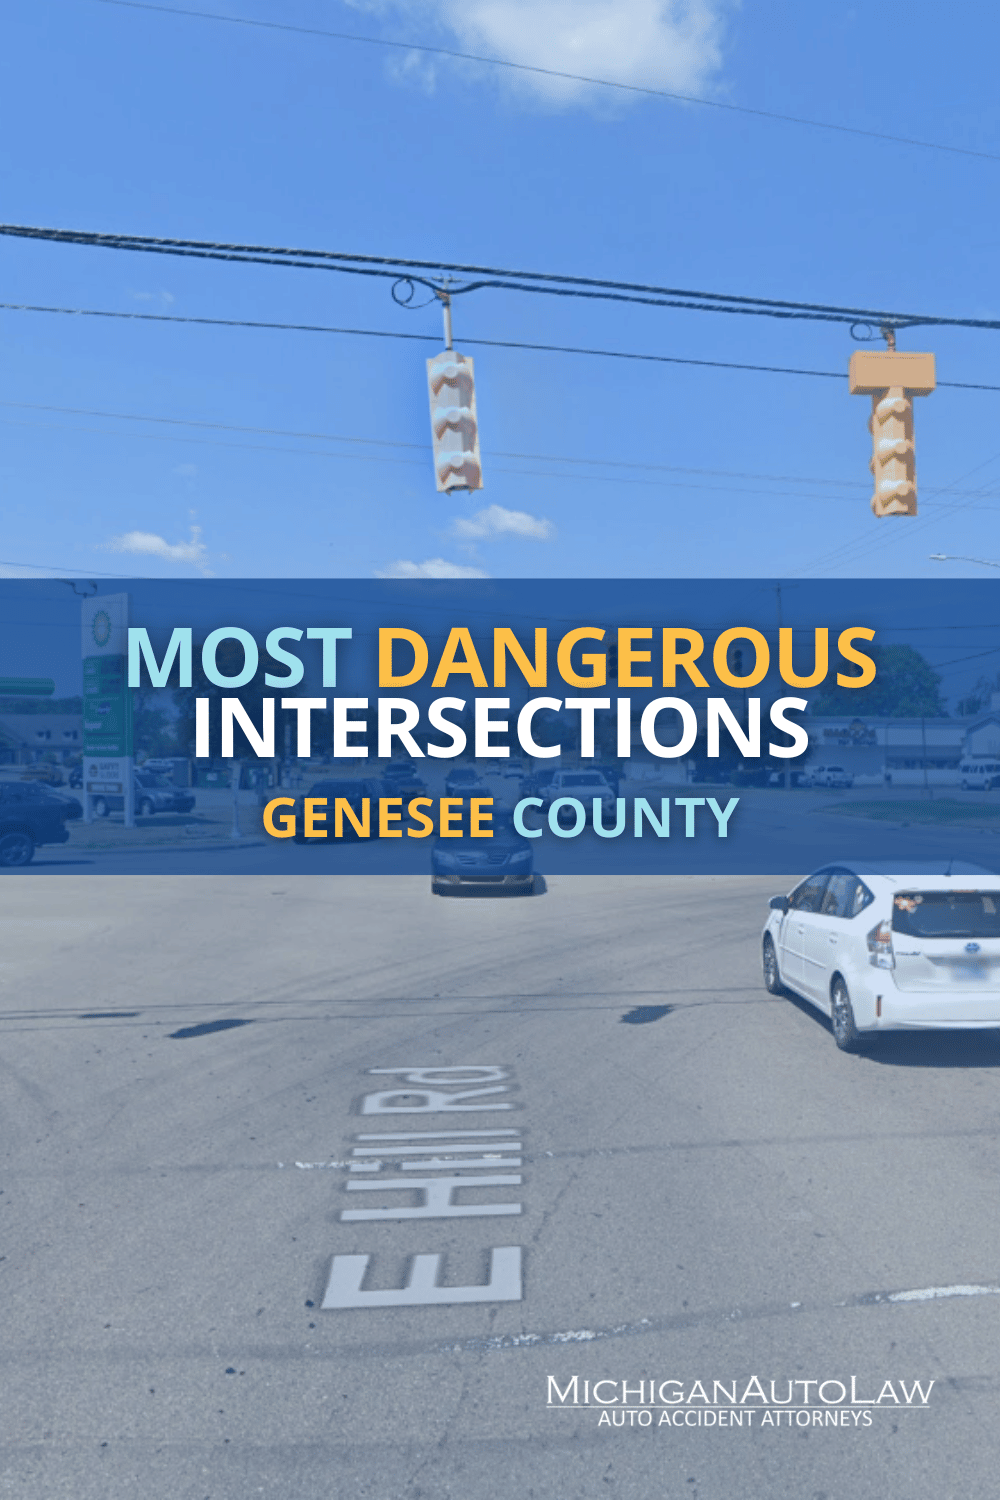 Genesee County’s Most Dangerous Intersections in 2021